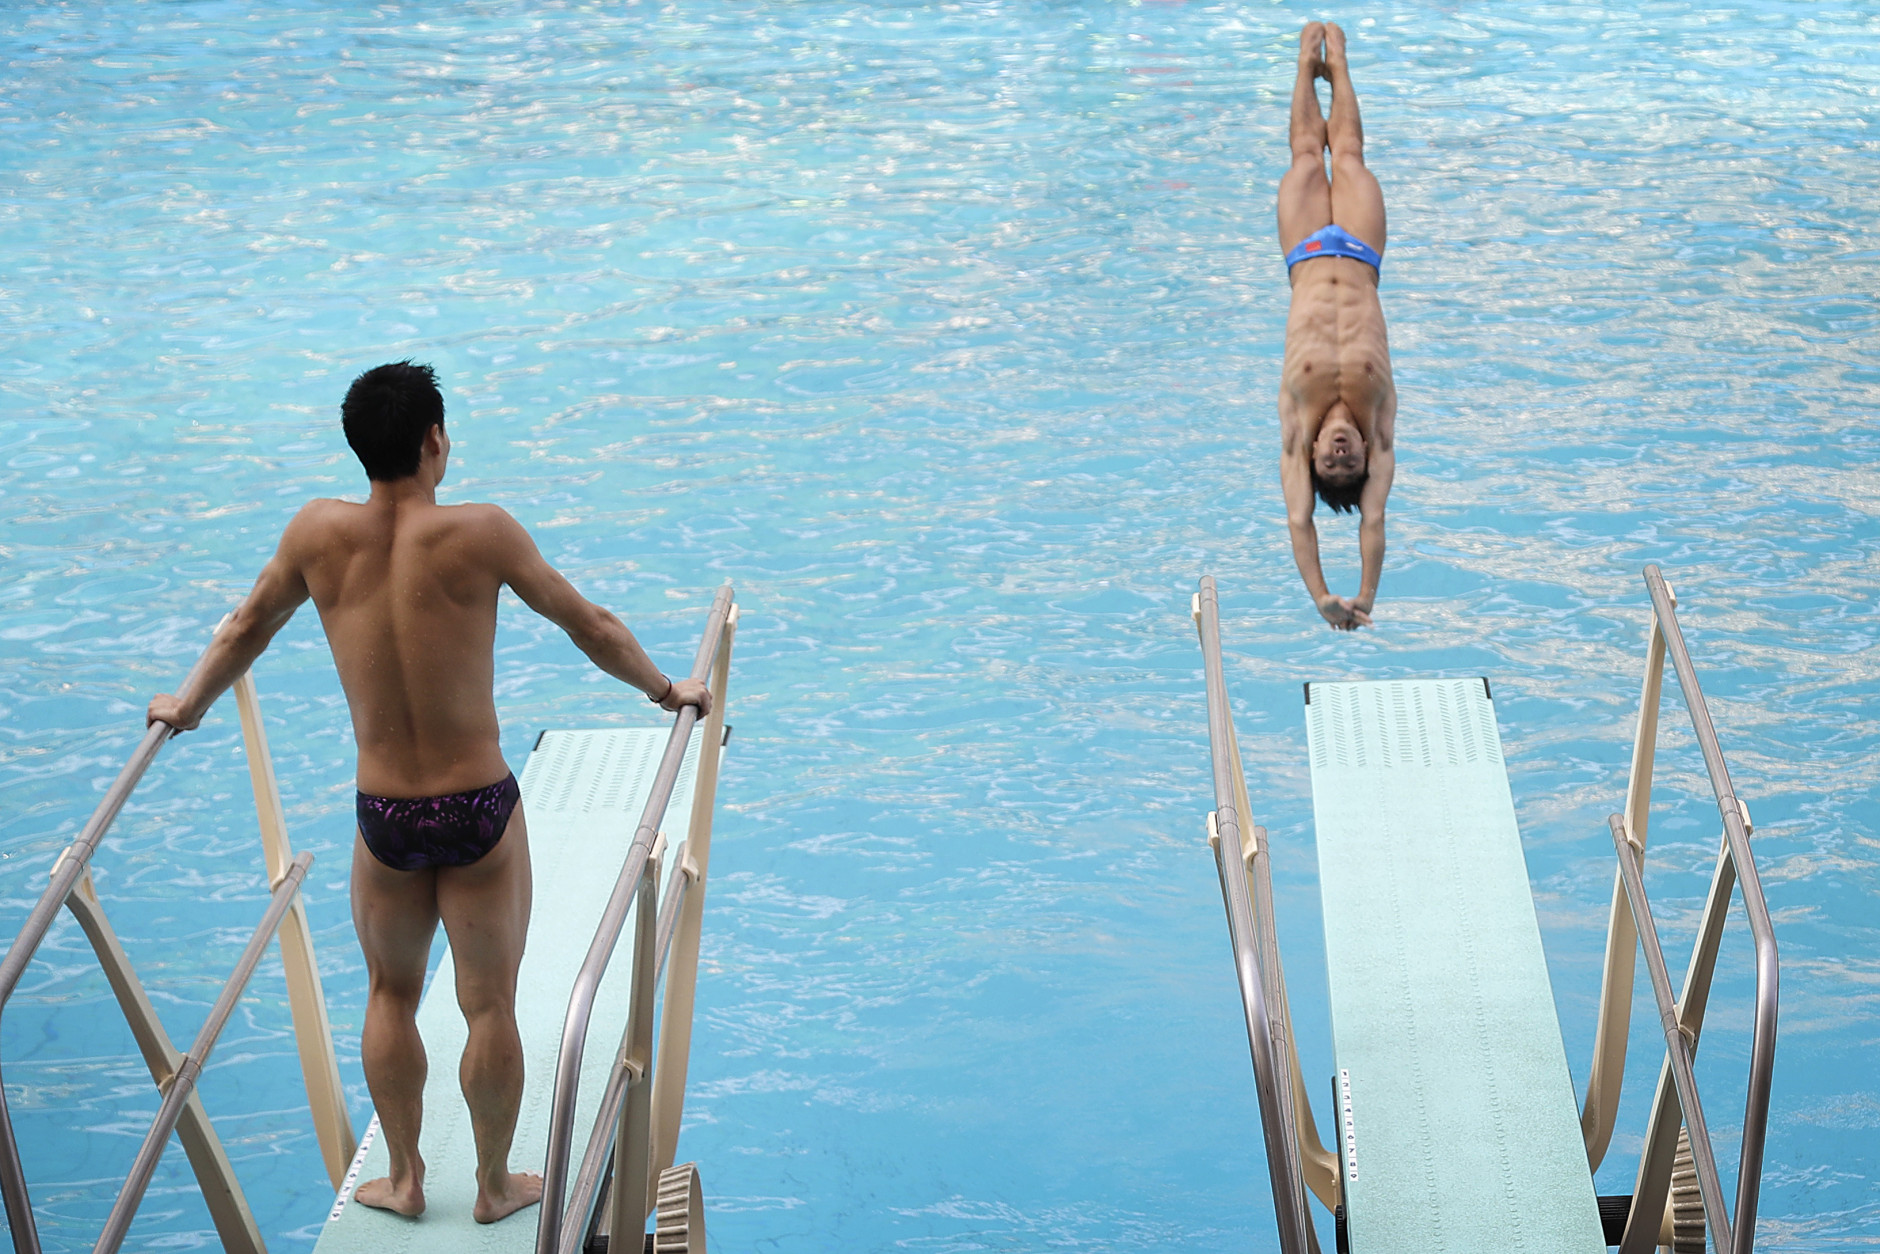 Members of China's diving team take part in a training session at the Maria Lenk Aquatic Center ahead of the 2016 Summer Olympics in Rio de Janeiro, Brazil, Wednesday, Aug. 3, 2016. (AP Photo/Wong Maye-E)